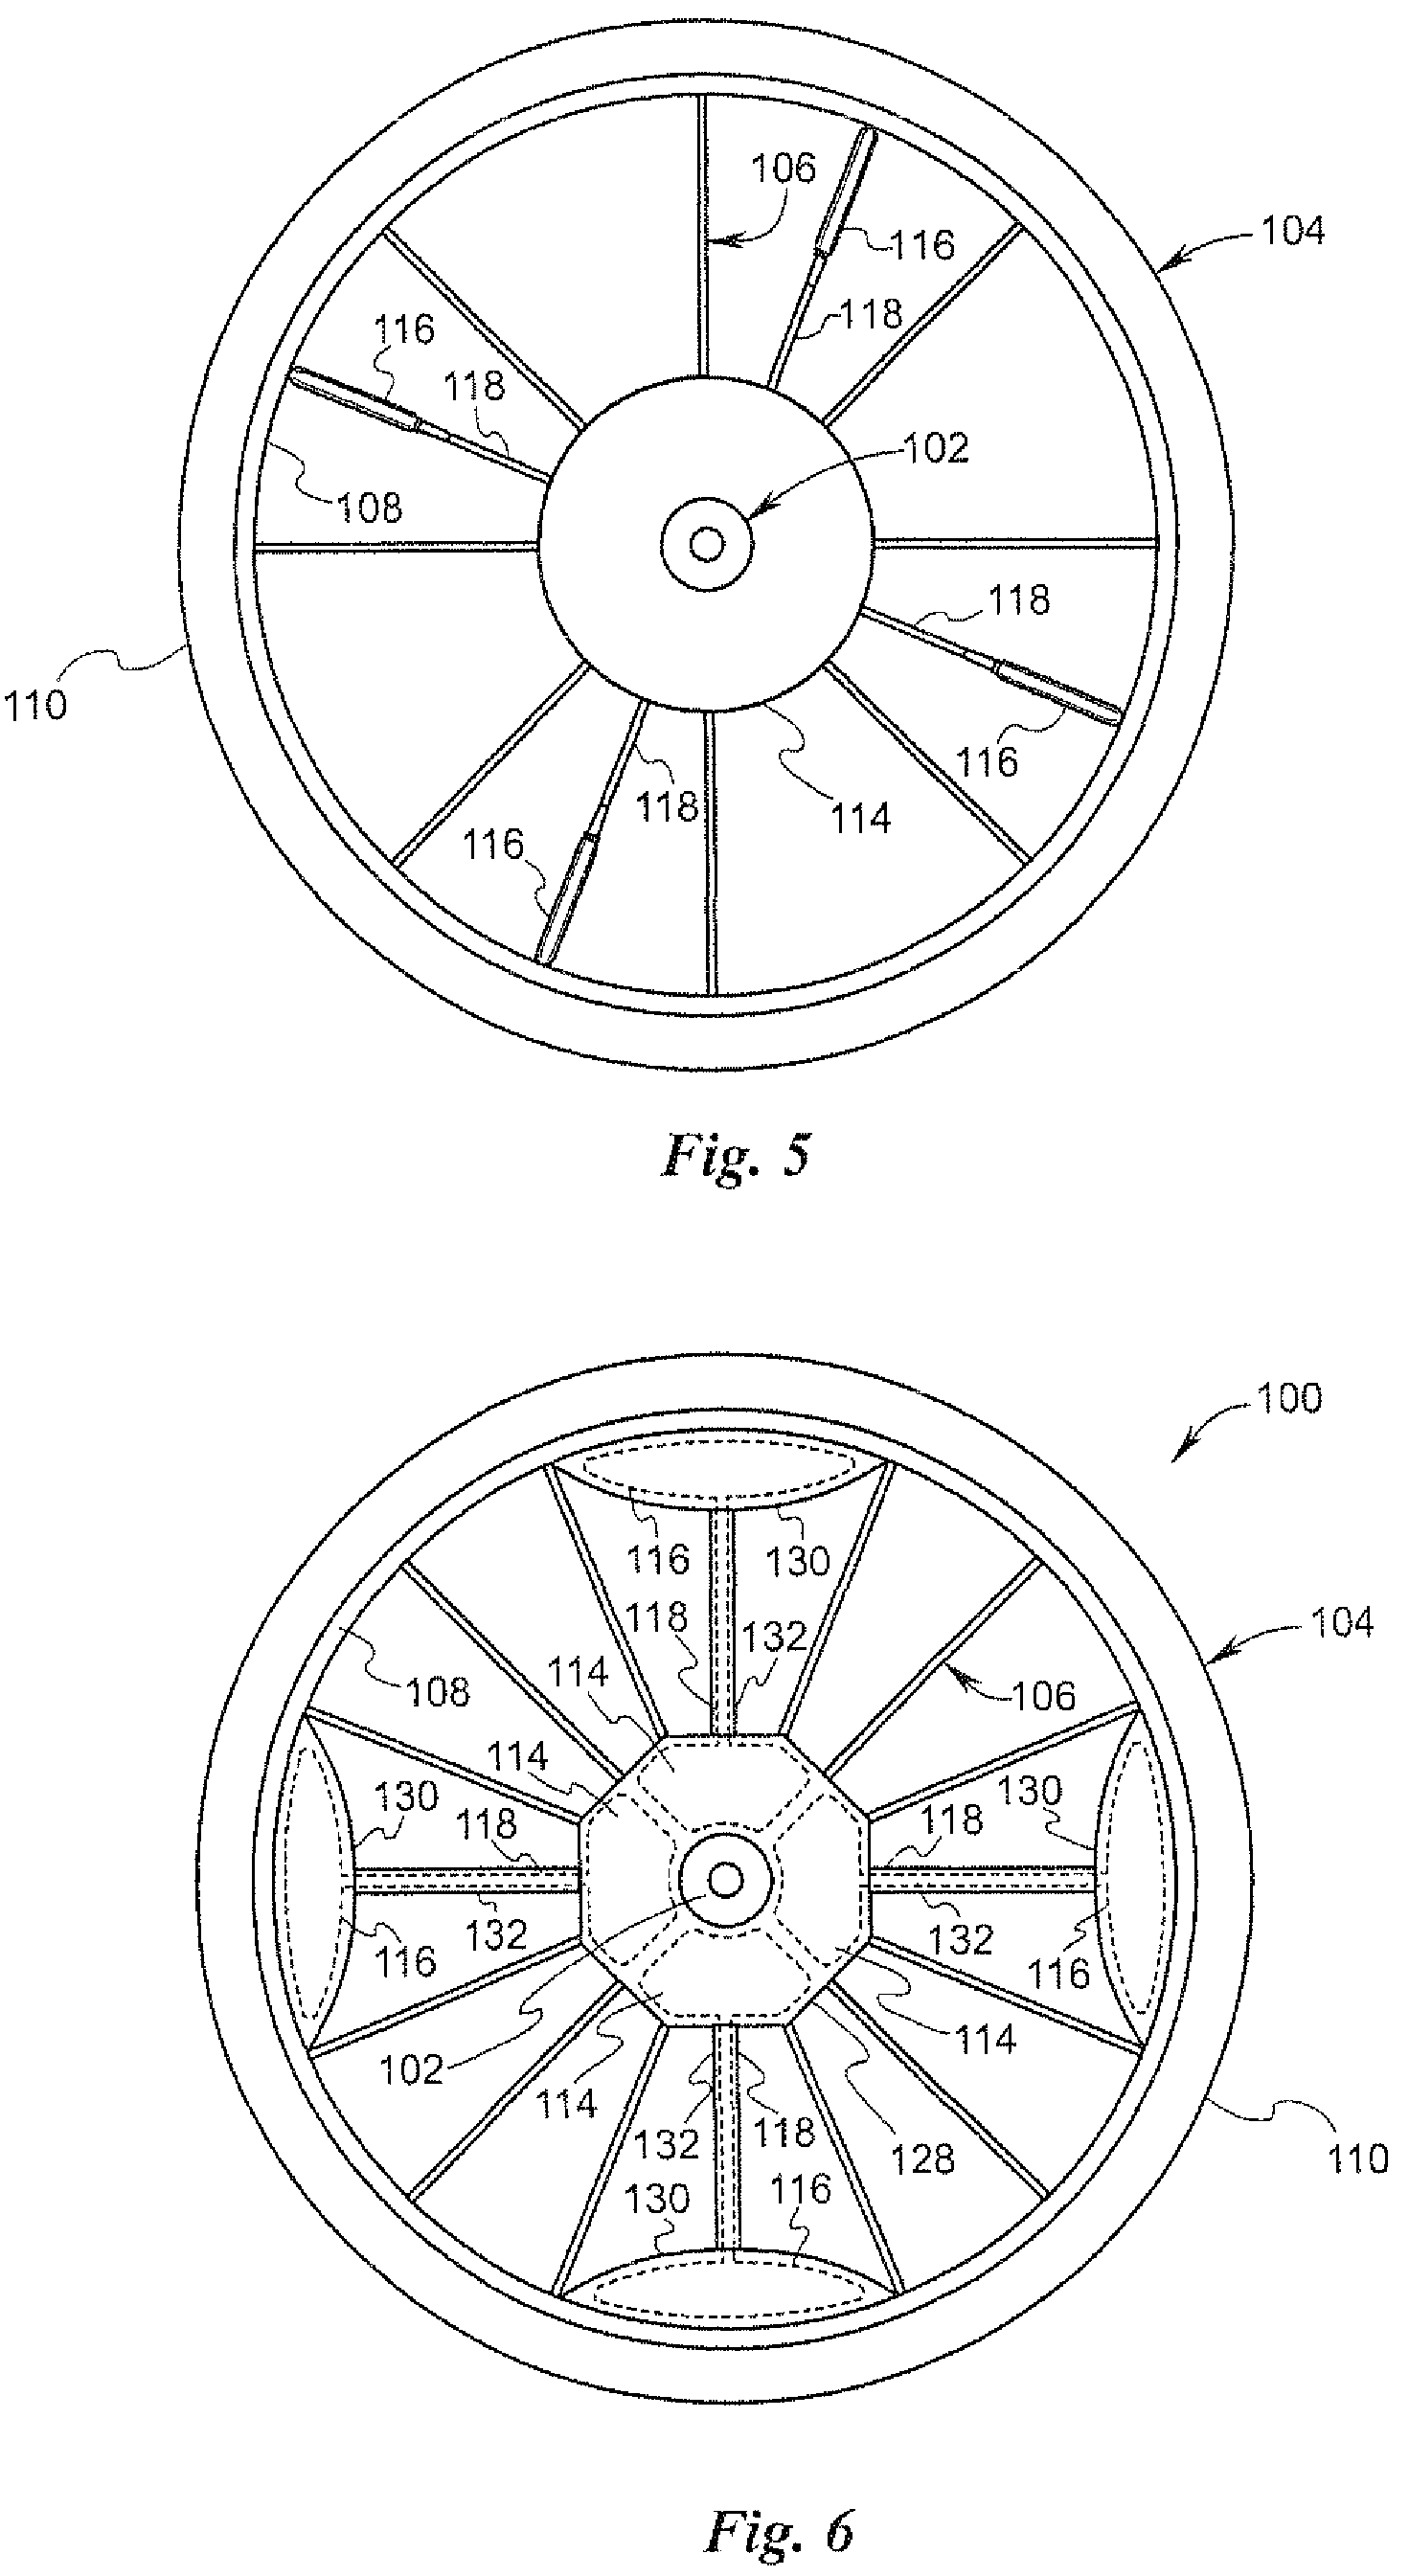 Momentum management in a wheel such as a traction wheel under a changing load